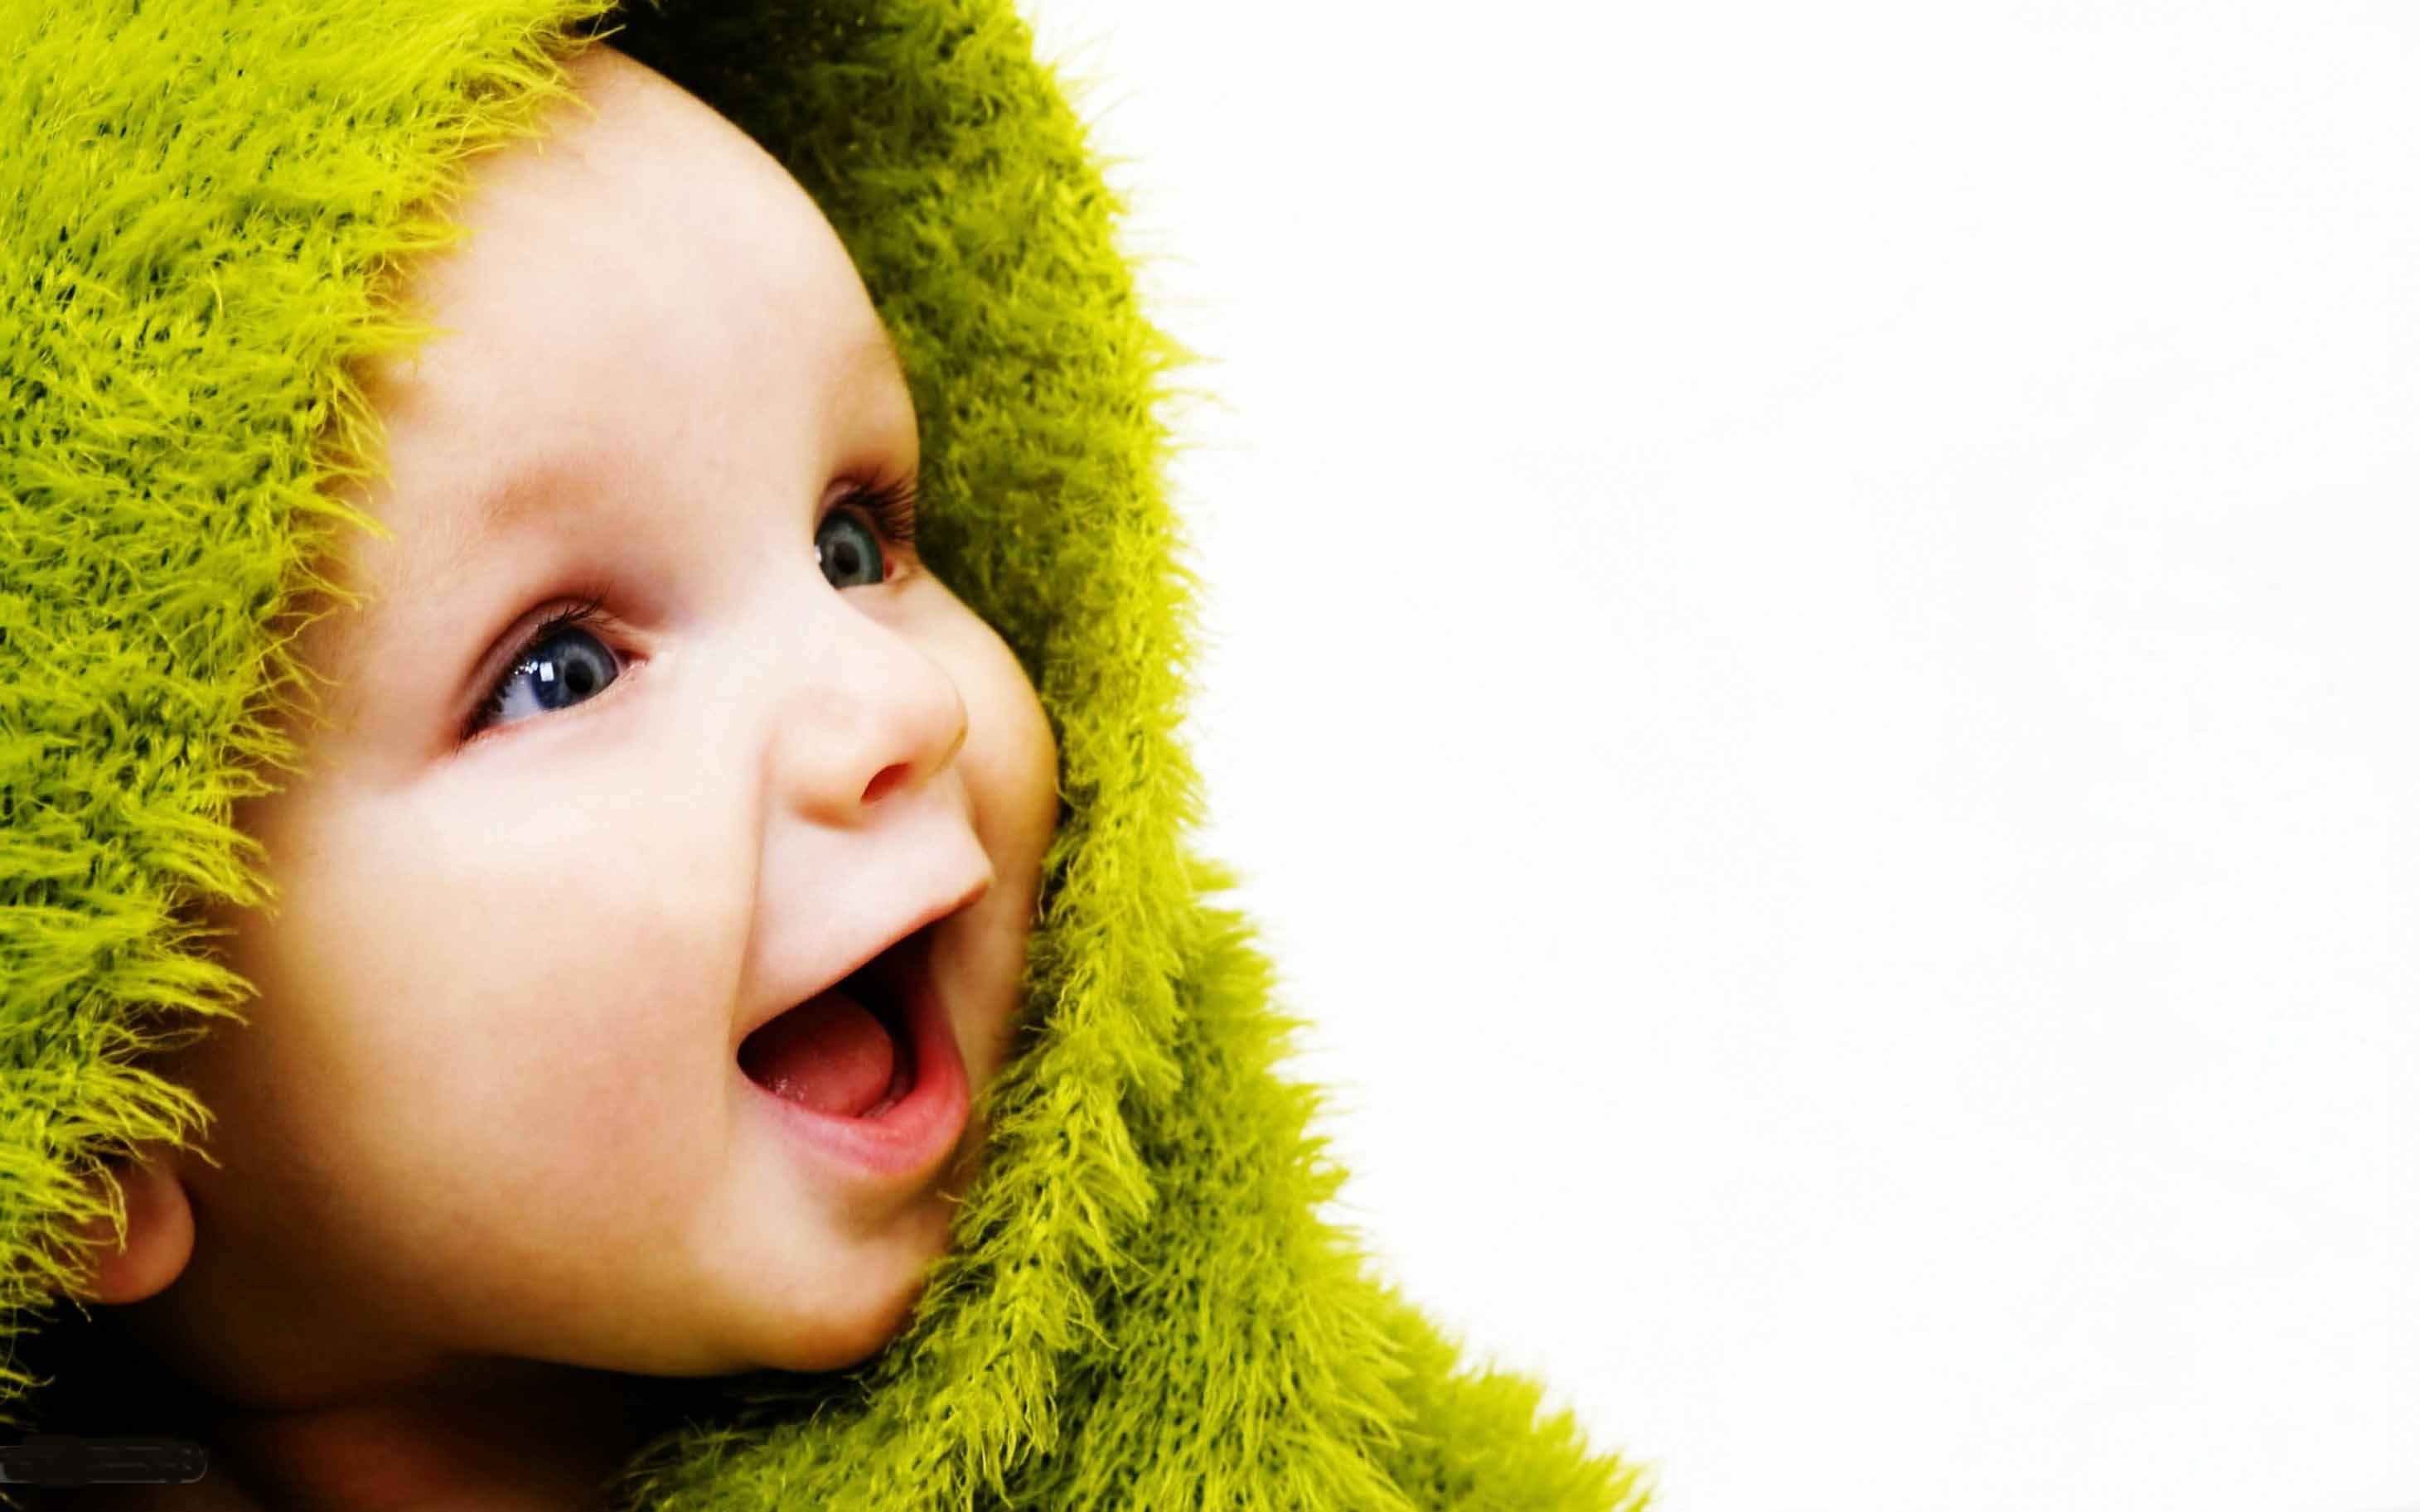 Indian cute baby hd wallpapers | Wallpapers Wide Free